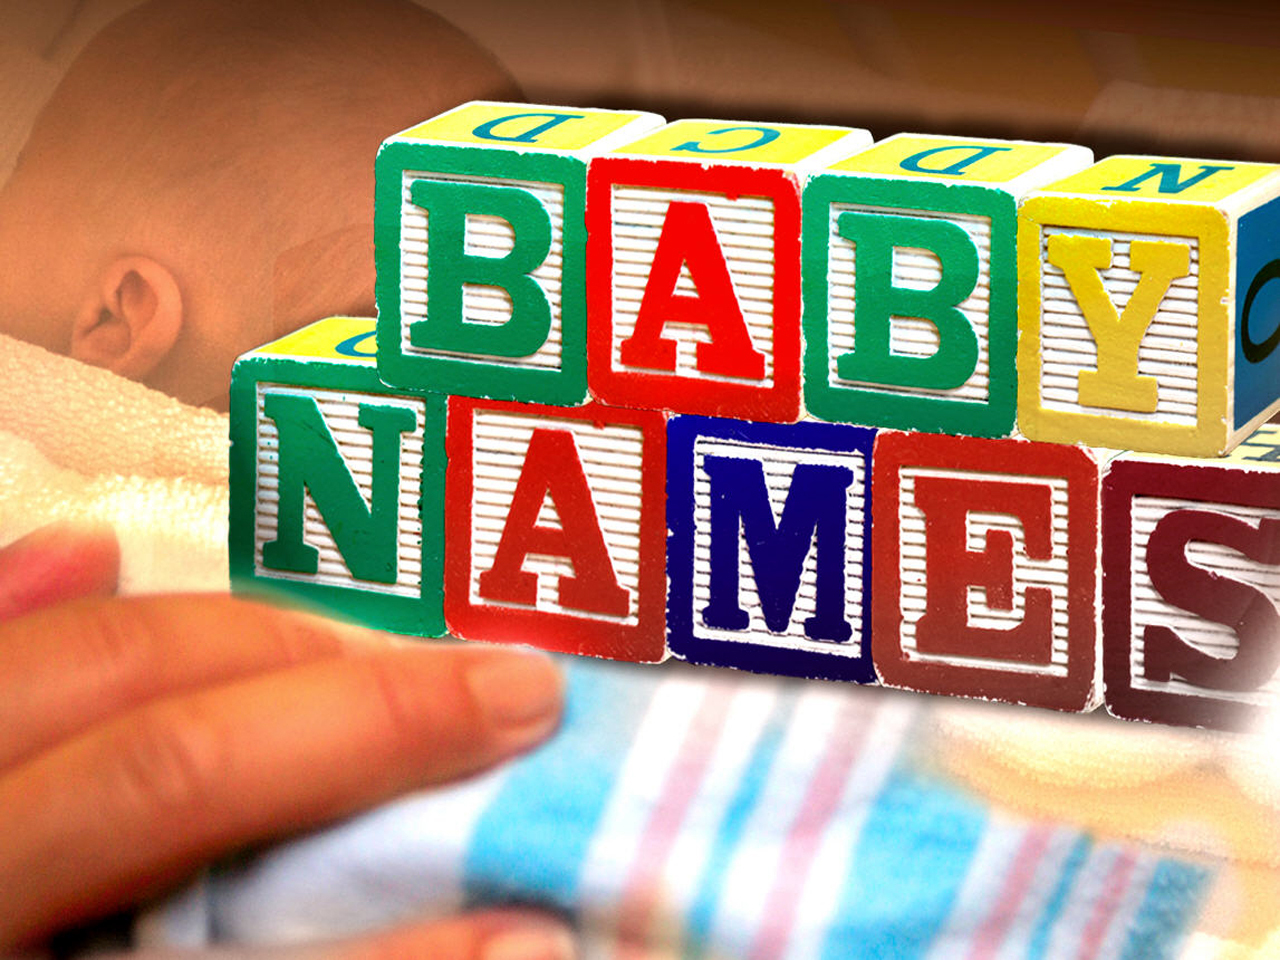 Jacob's 14-year run as most popular U.S. baby name ends - CBS News